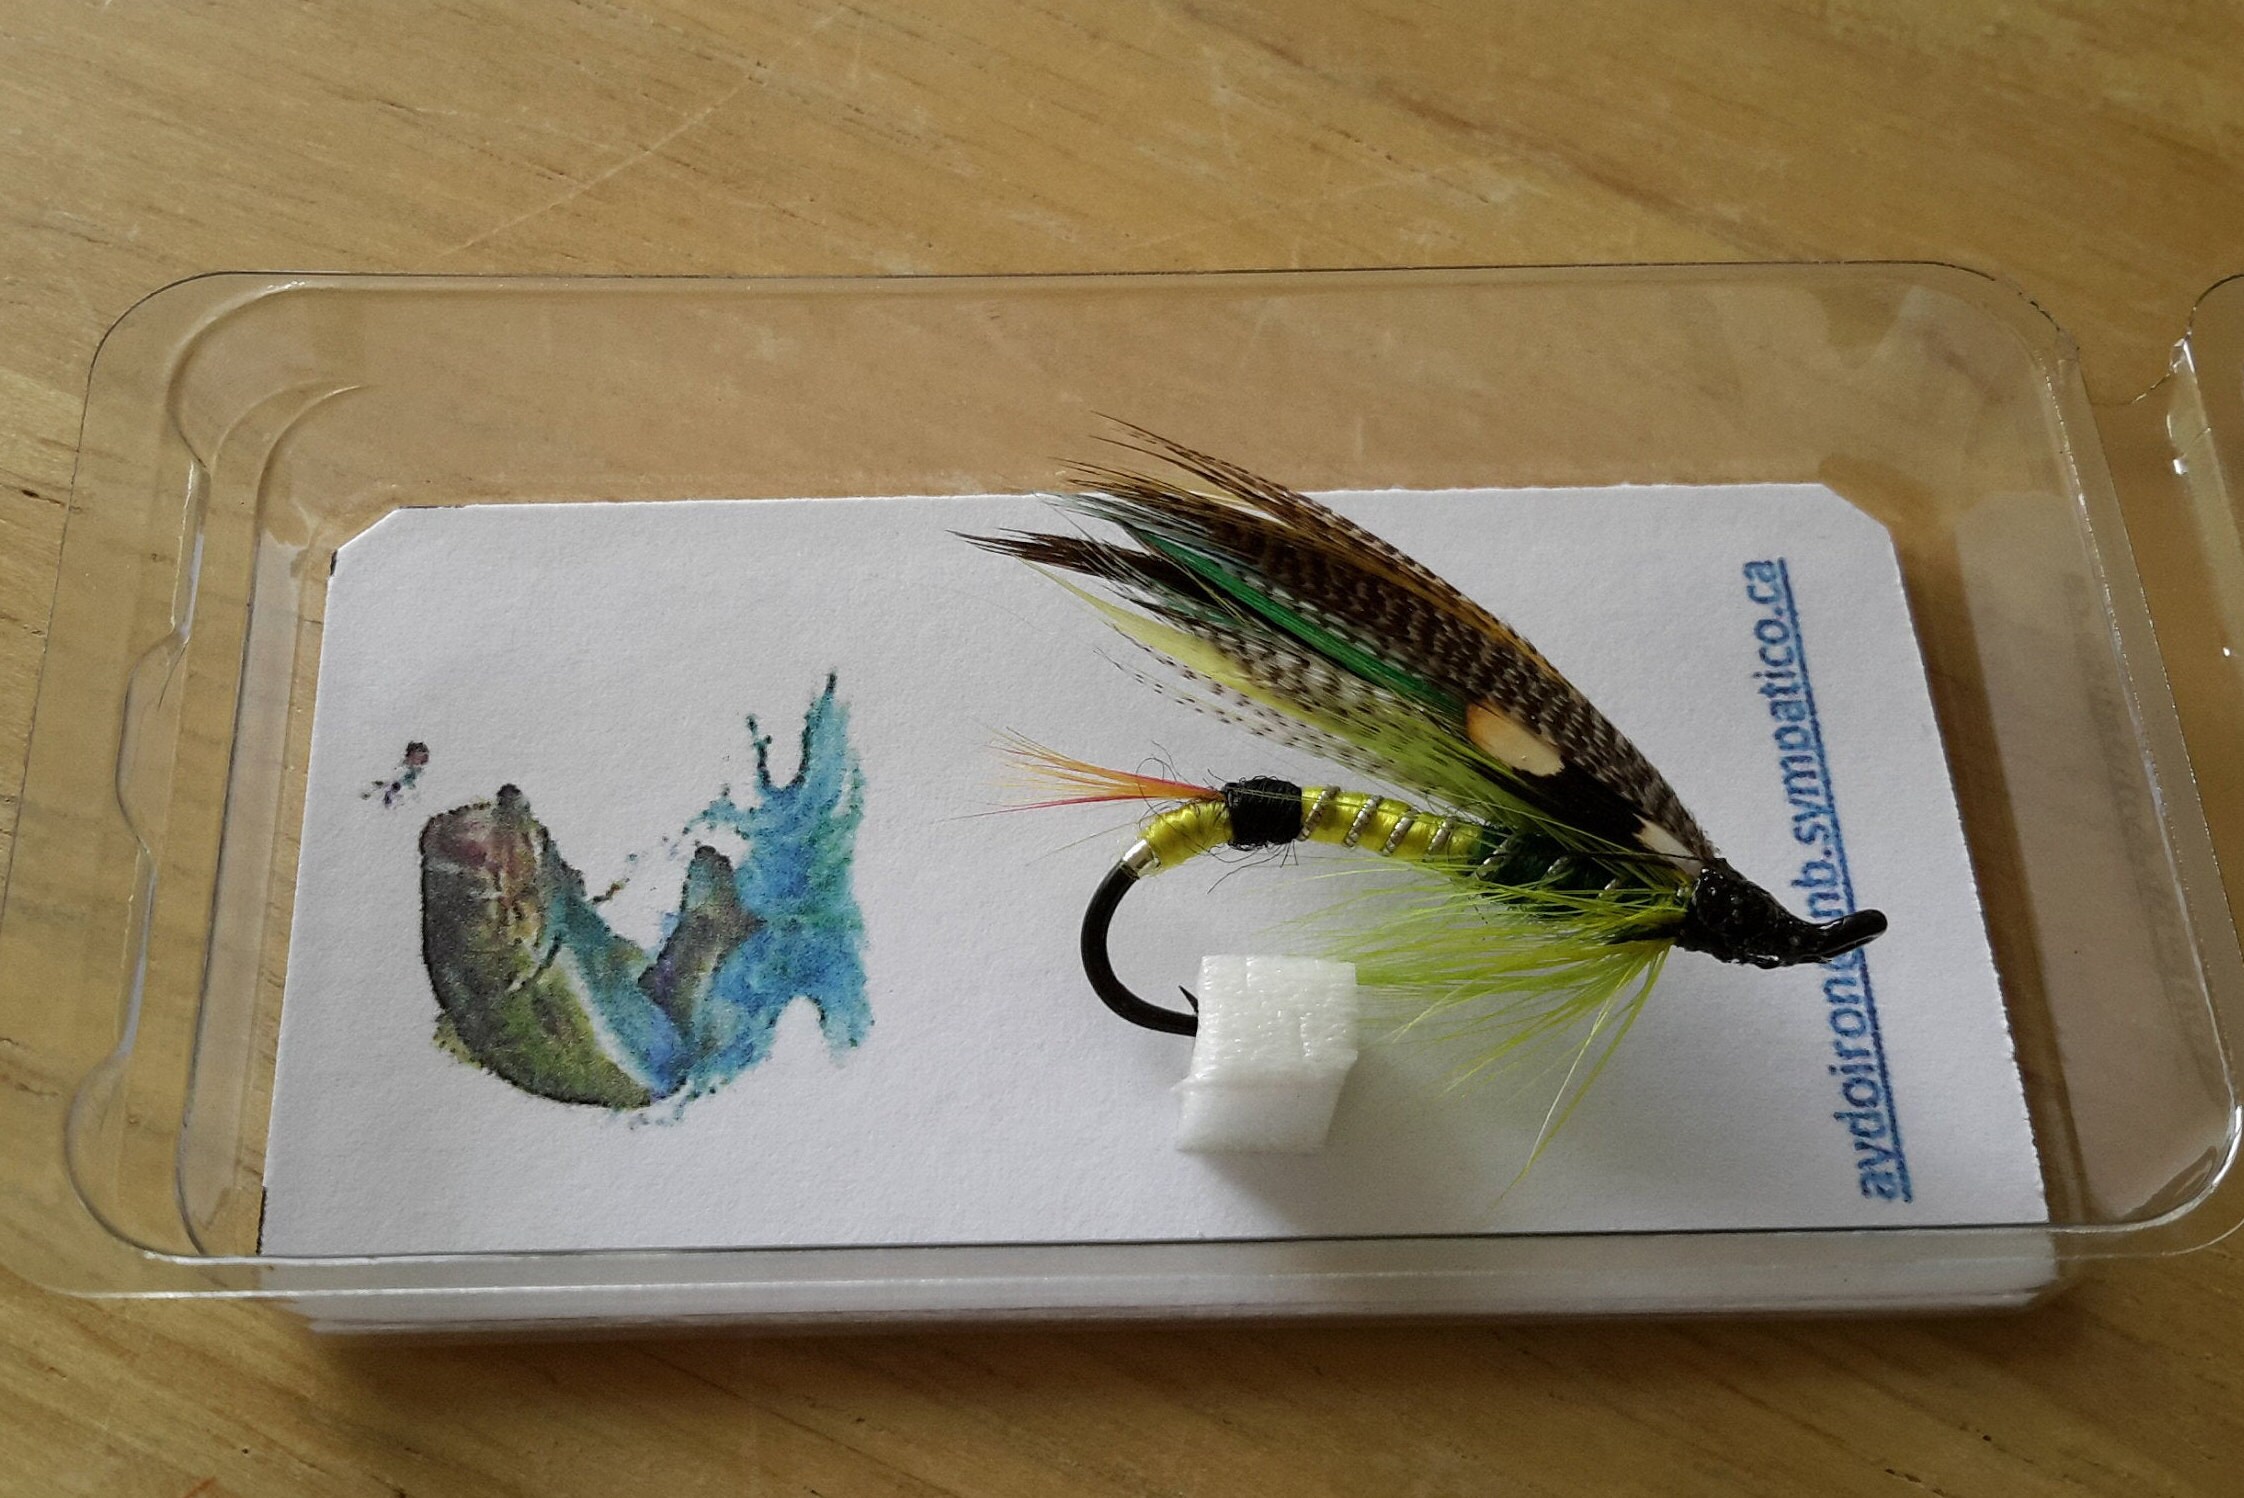 Nuptial Size #6 Salmon . Fly Fishing Flies...